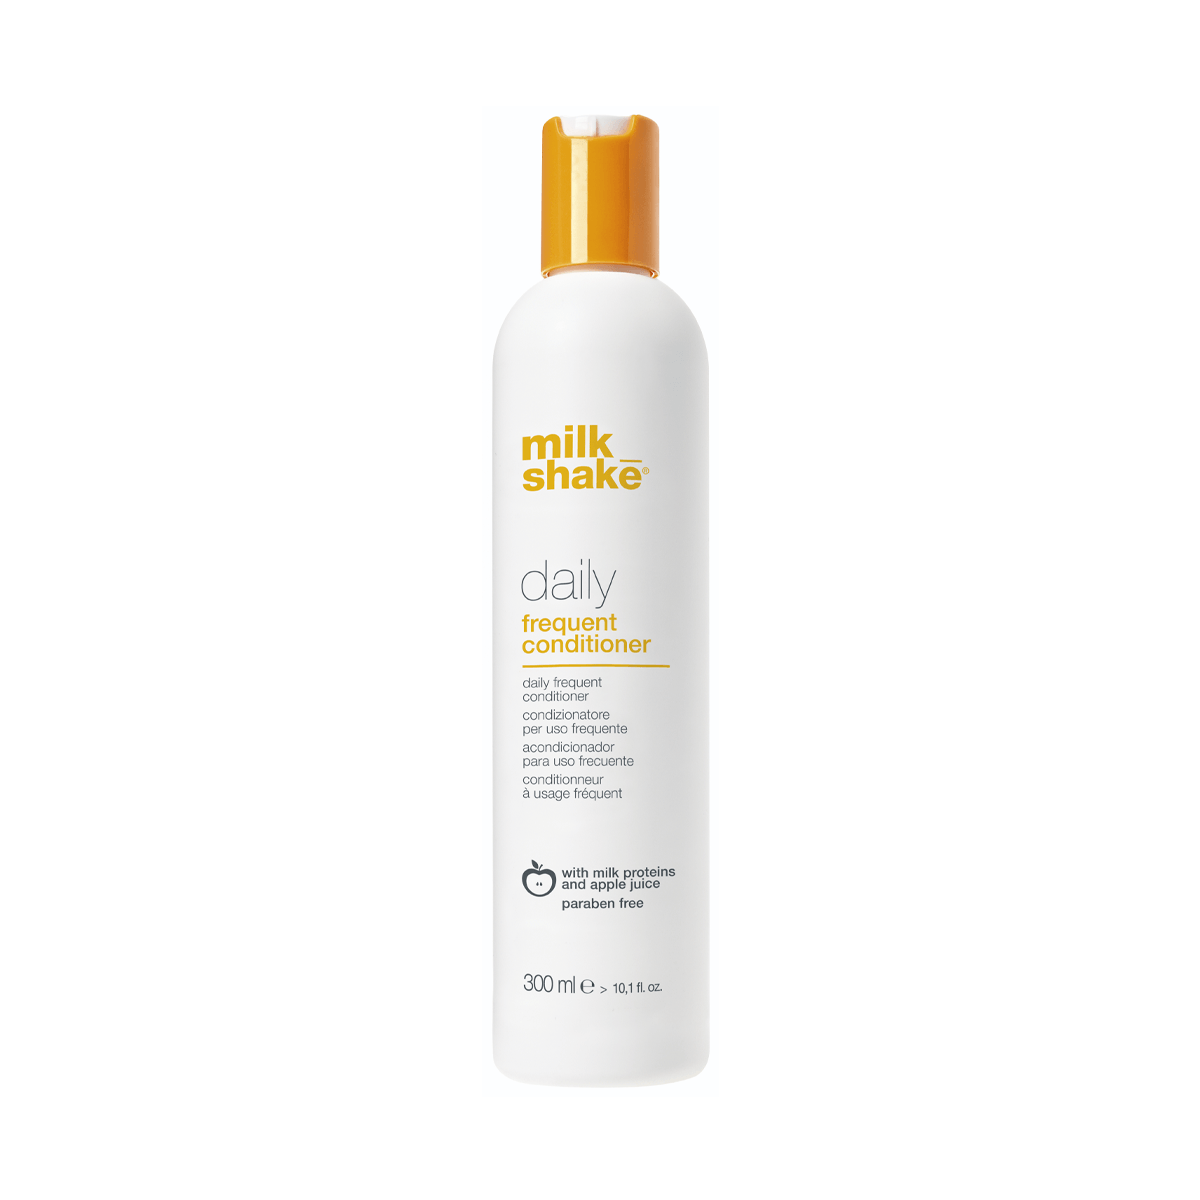 Milk_shake Daily frequent conditioner